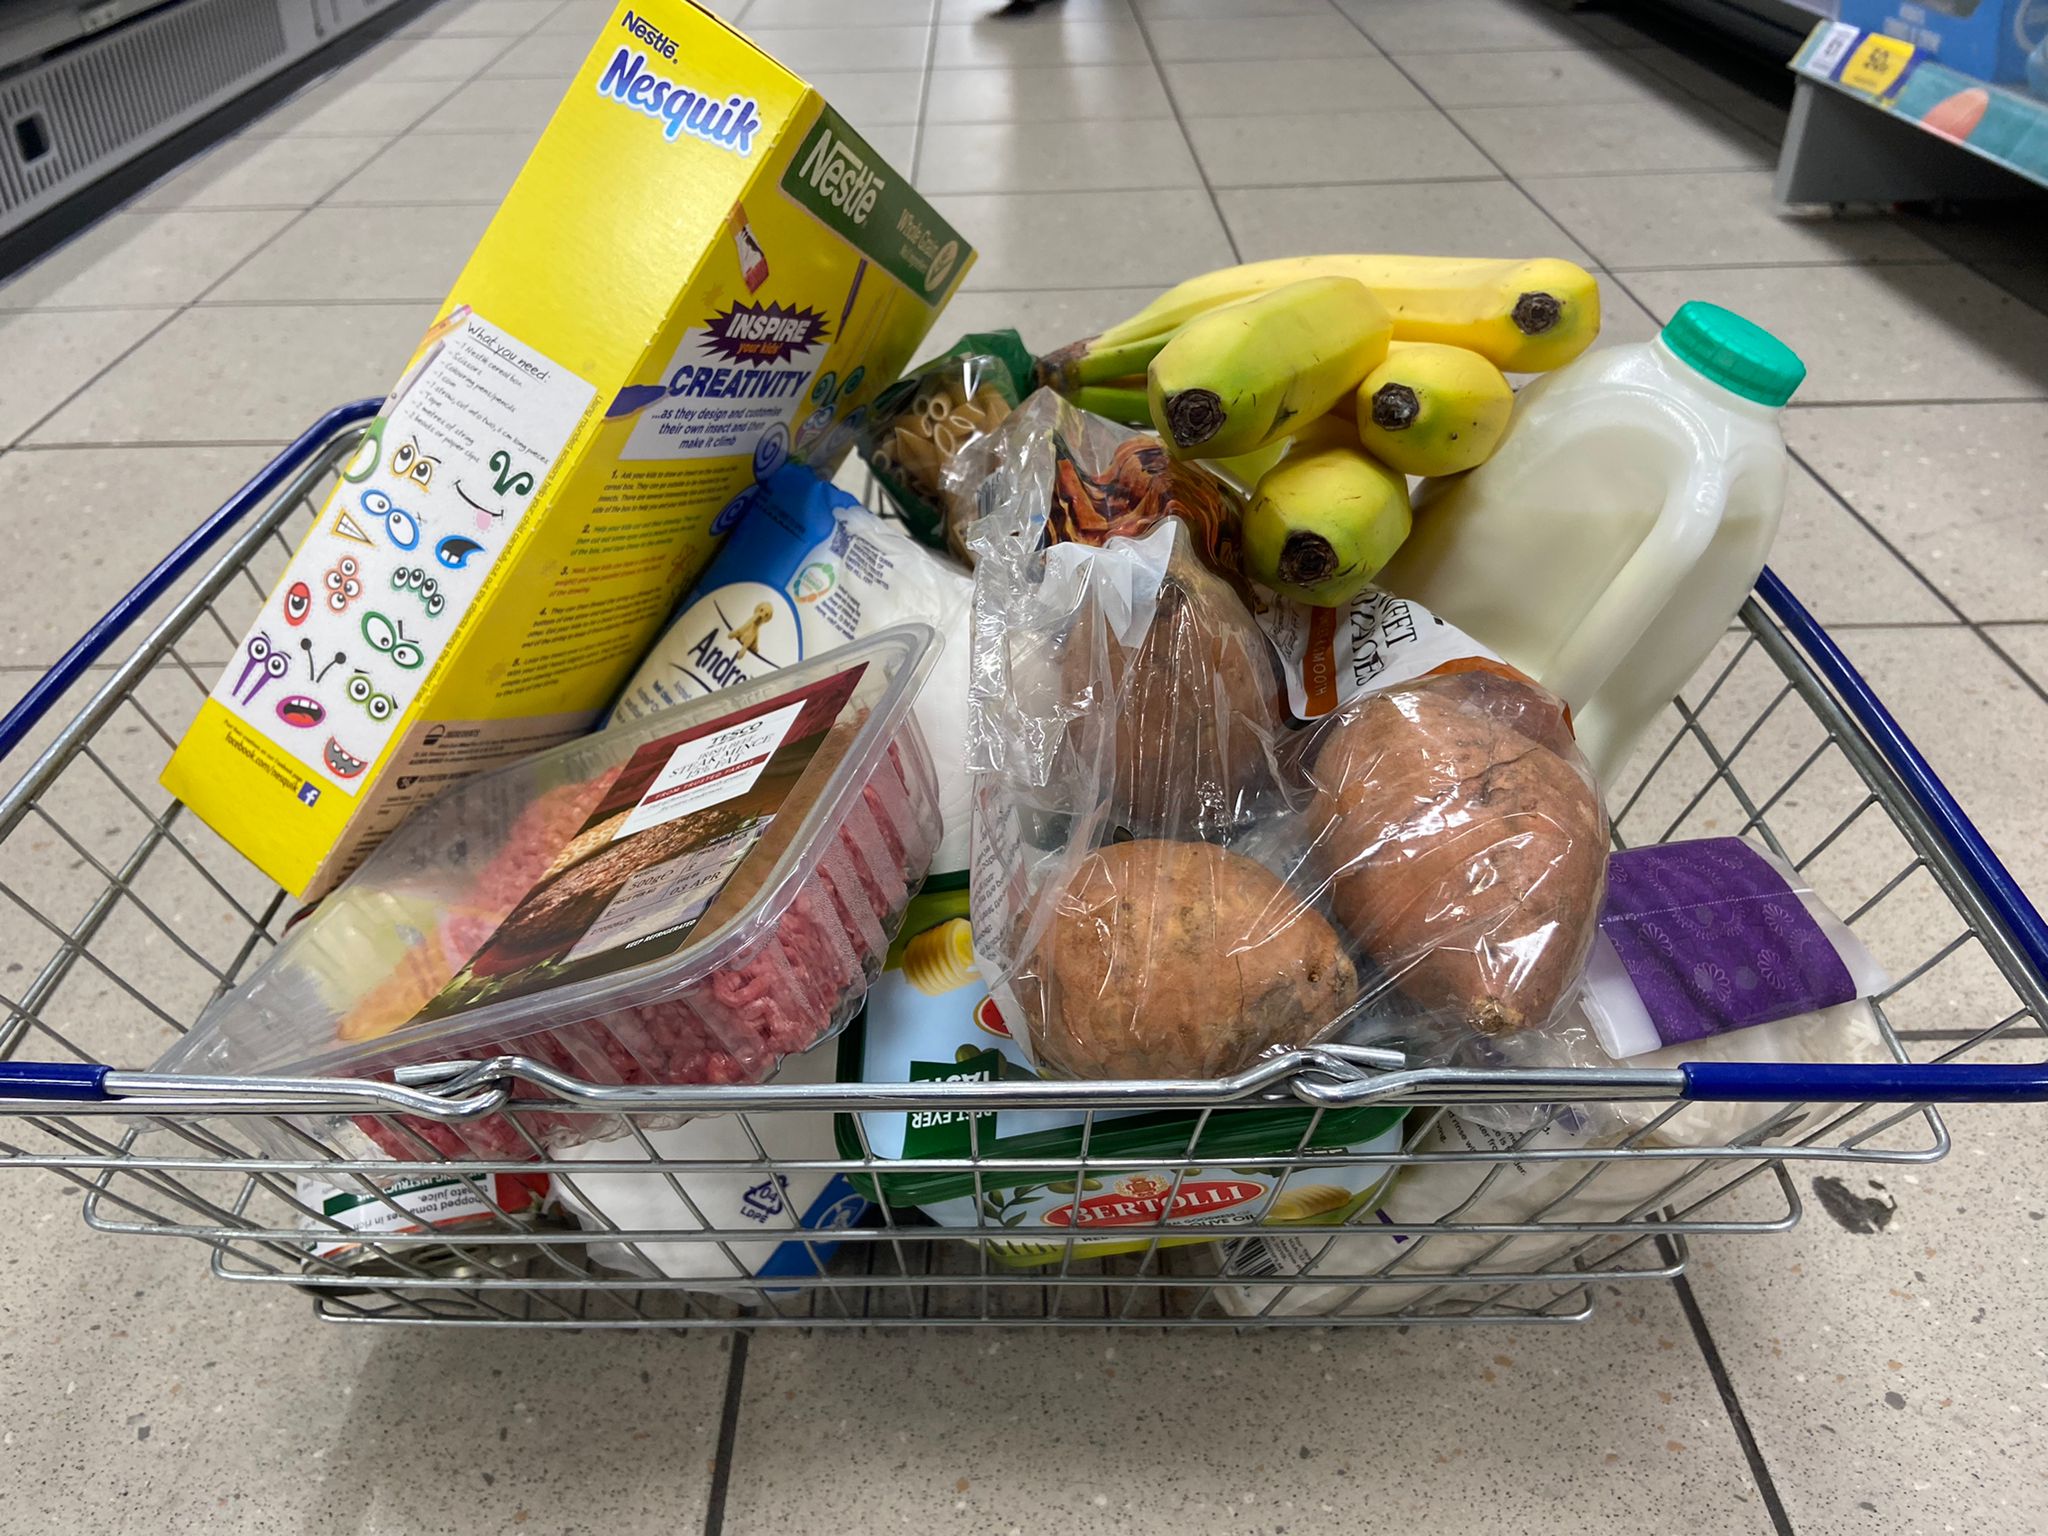 Our reporter did a shop of household food items in Tesco to find out how families are being hit by price surges